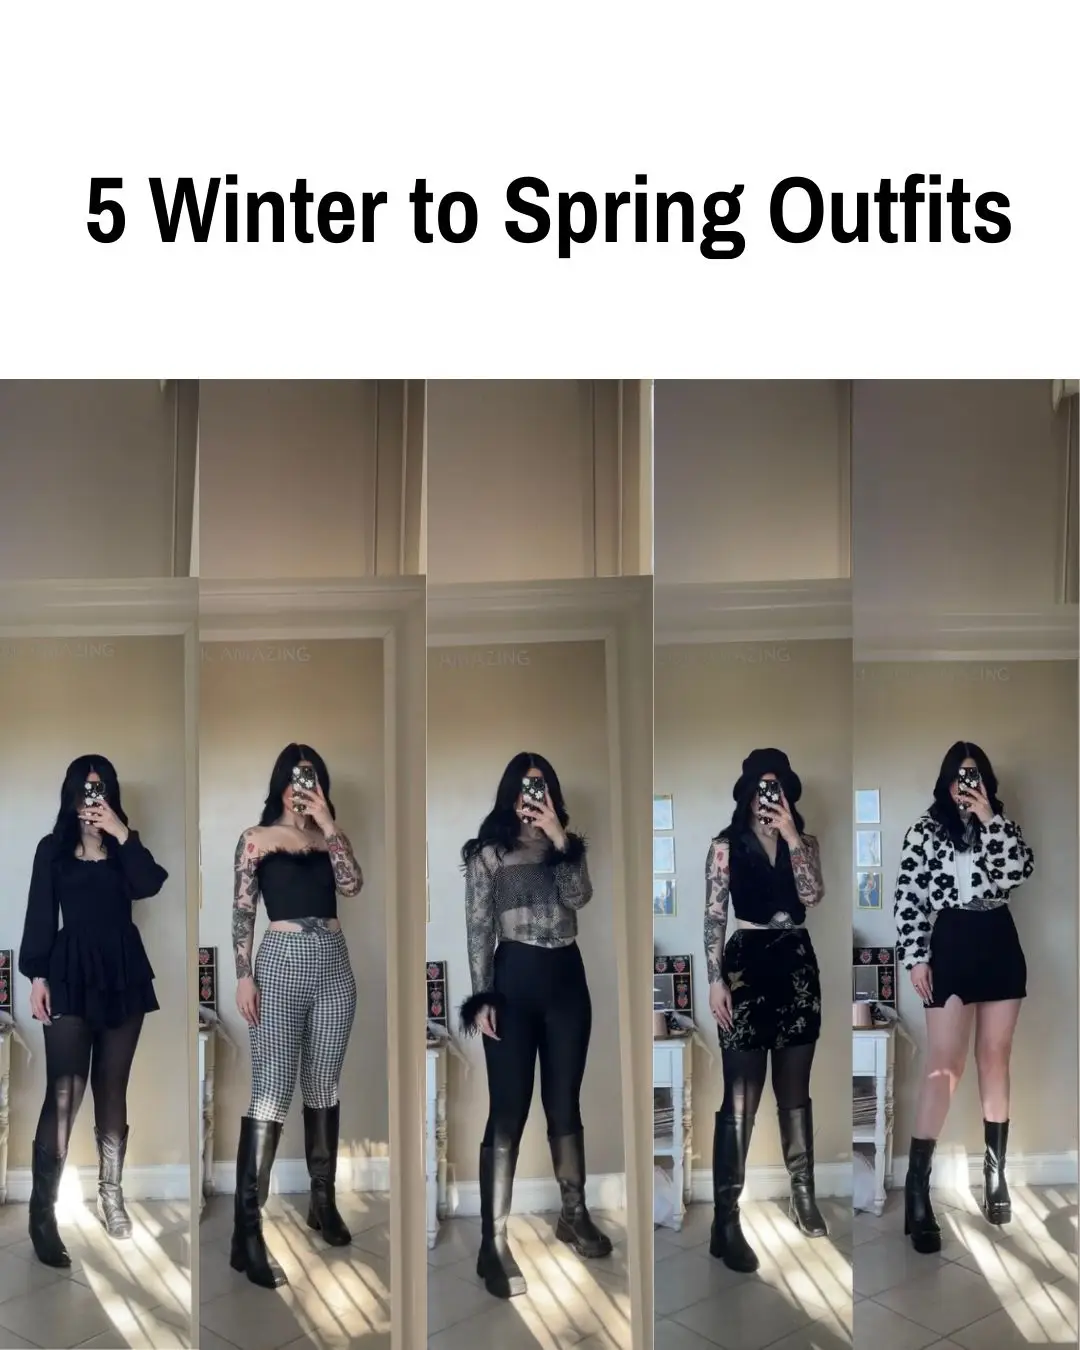 5 Winter to Spring Outfits, Gallery posted by Samantha